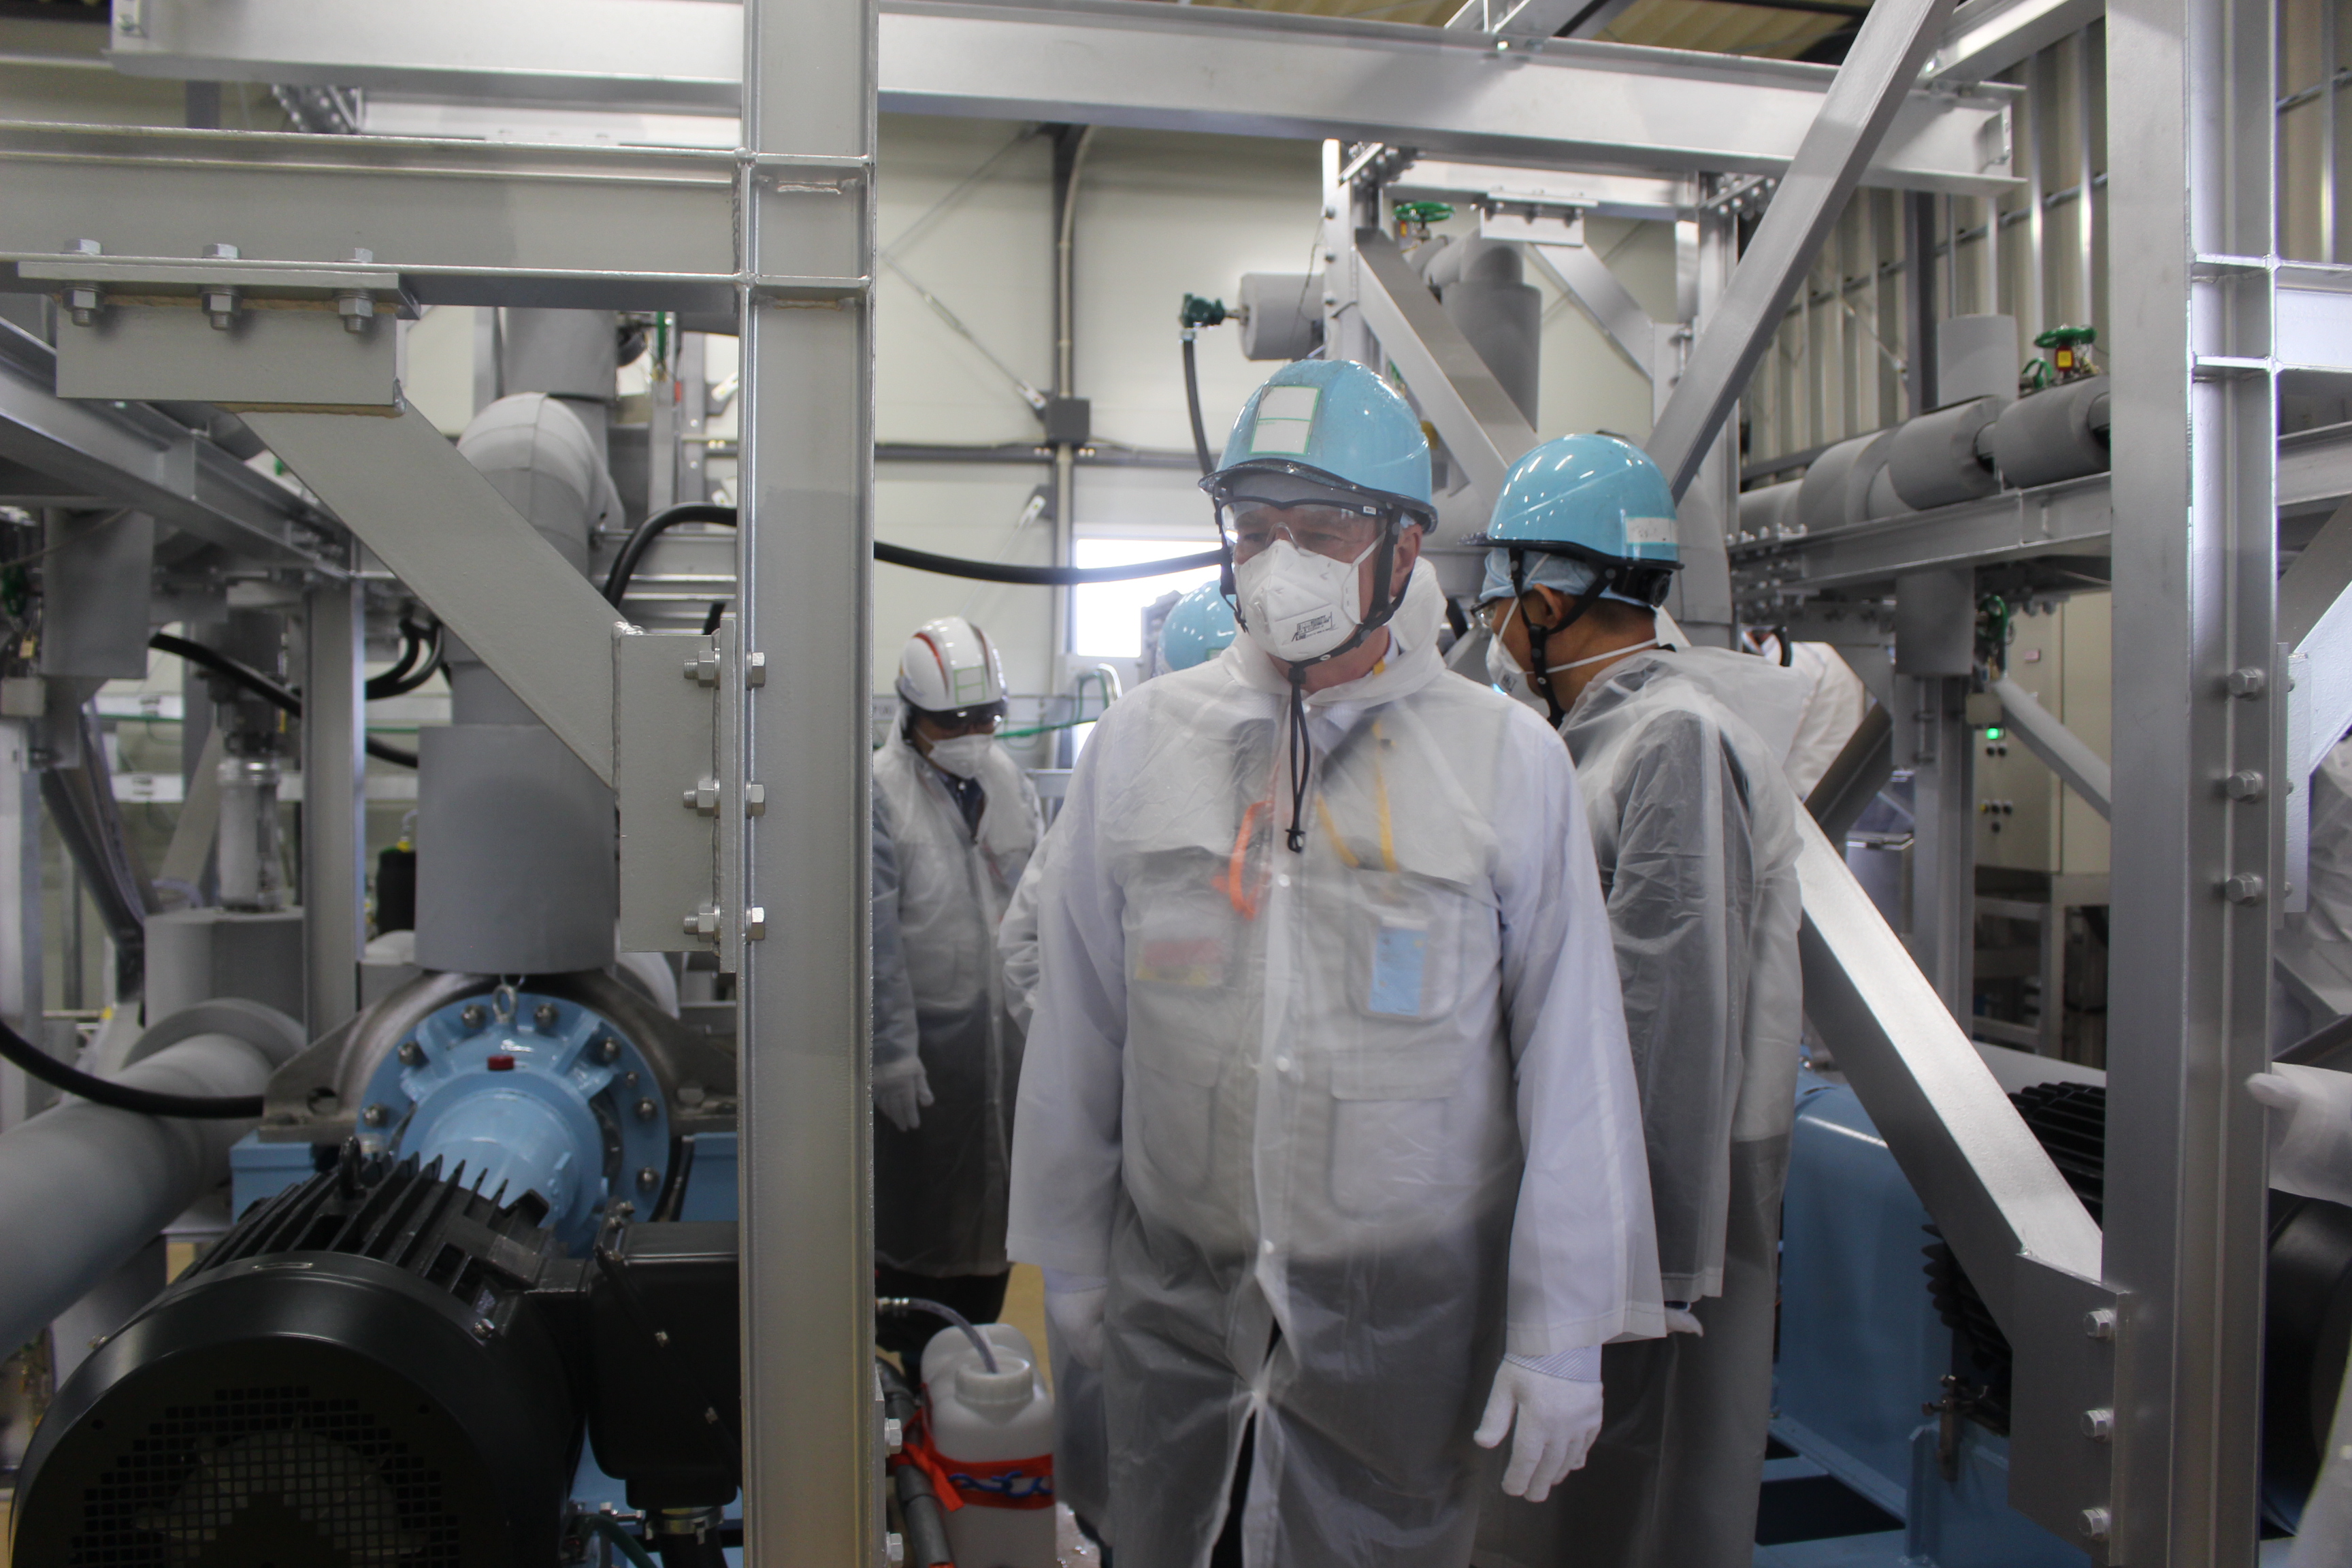 Site visit to the Fukushima Daiichi Nuclear Power Station by the IAEA Task Force to conduct a comprehensive review mission regarding the planned discharge of ALPS treated water